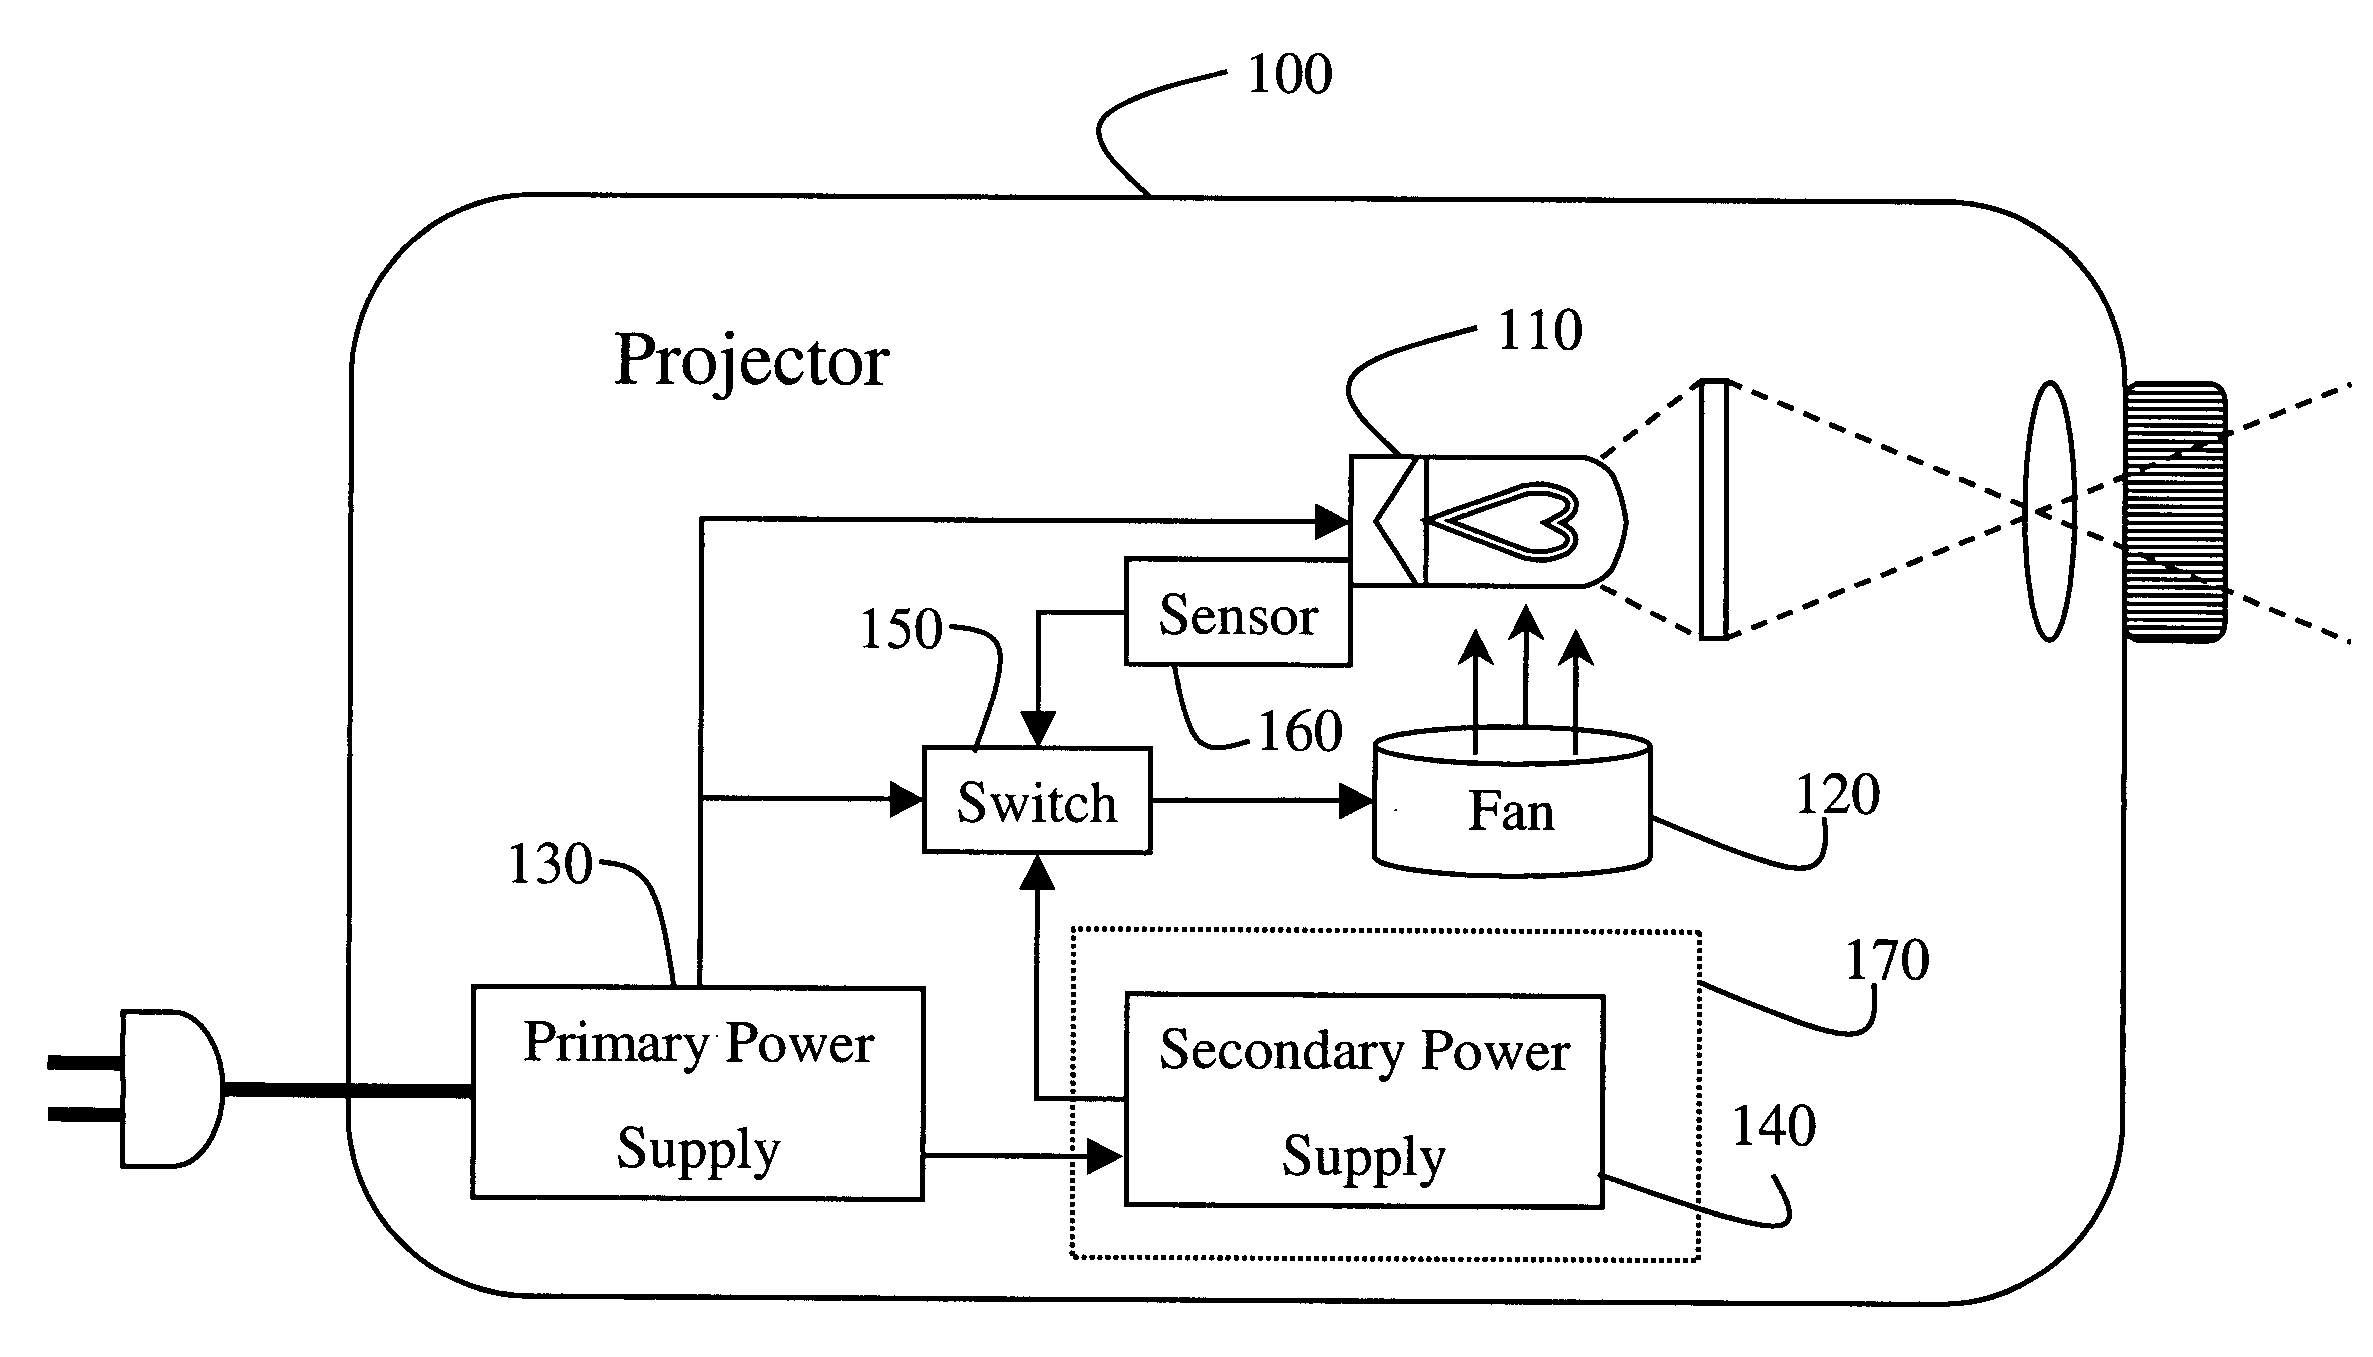 Time-extended cooling system for line-powered apparatus